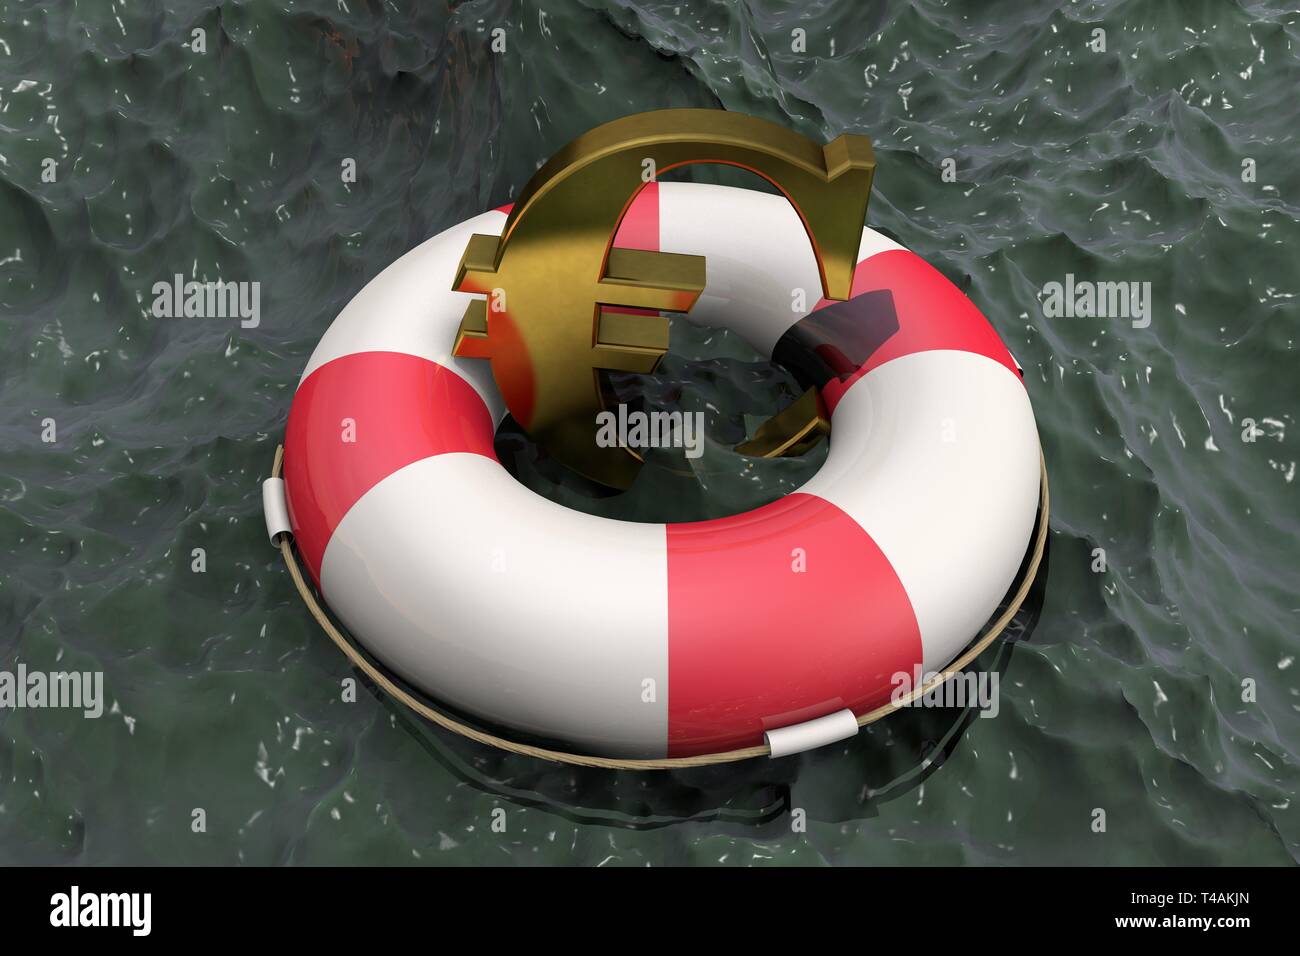 3d illustration: Golden symbol of the euro on a Lifebuoy,on the background of muddy water. Support for the European Union economy. Financial injection Stock Photo